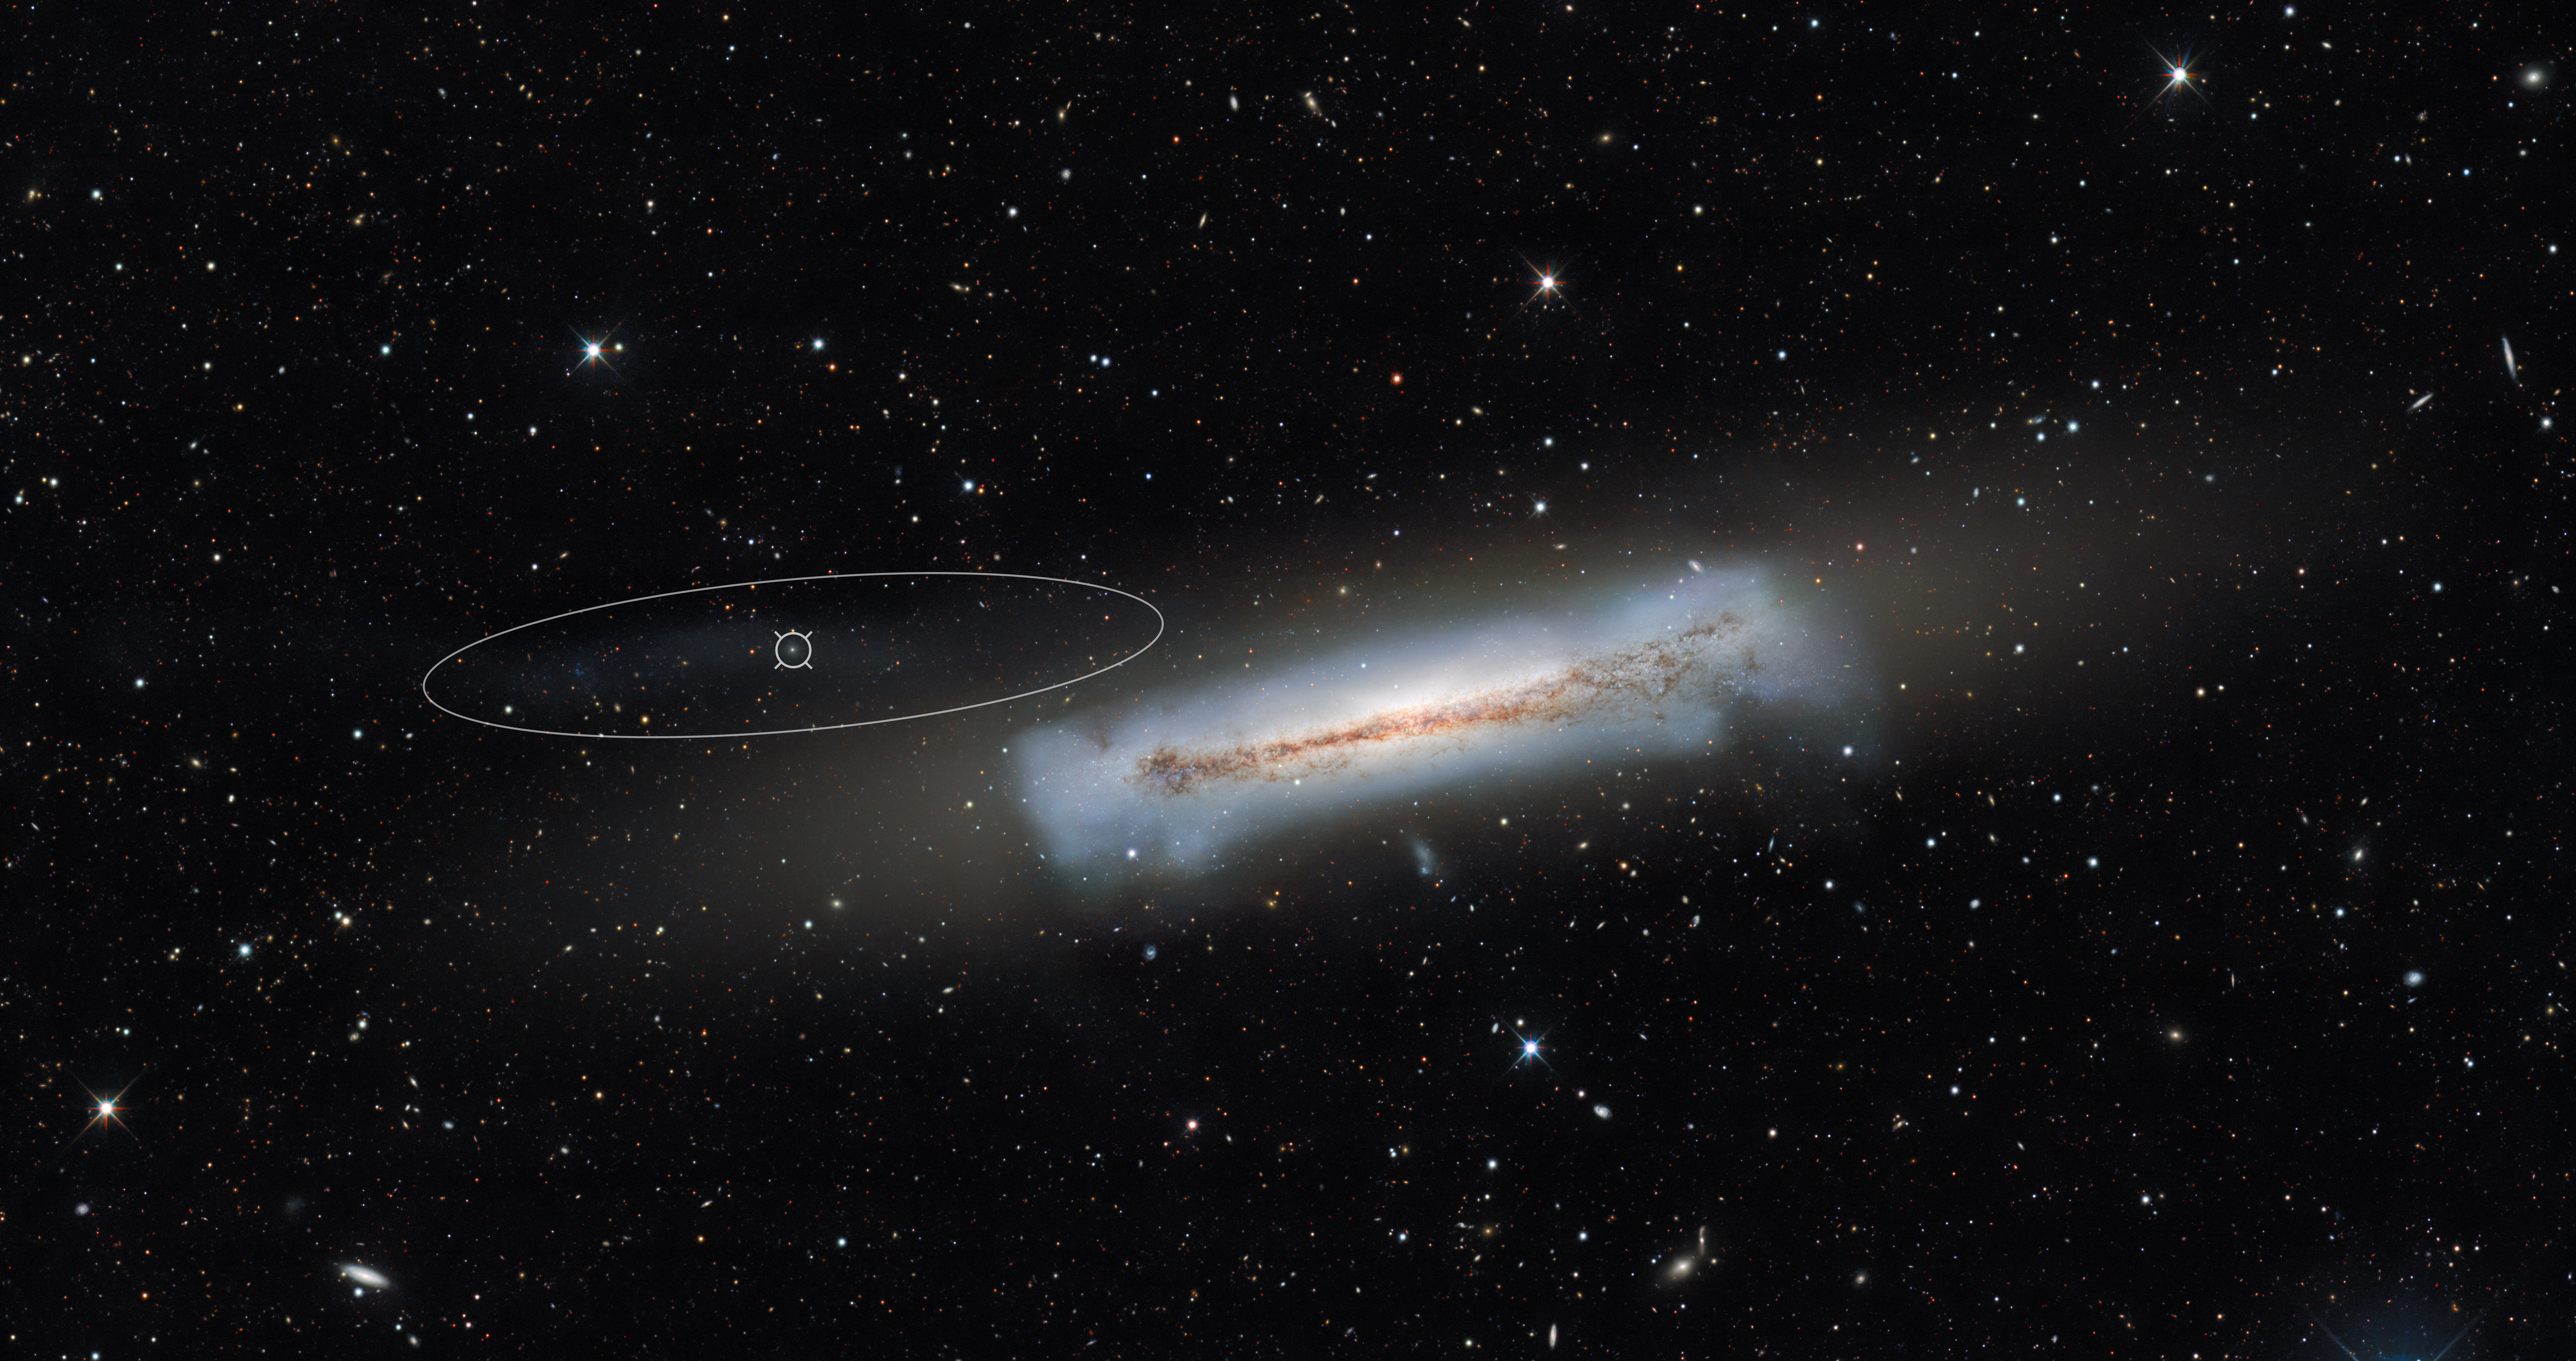 Image showing the NGC 3628 galaxy and an example of an ultra-compact dwarf galaxy (highlighted)